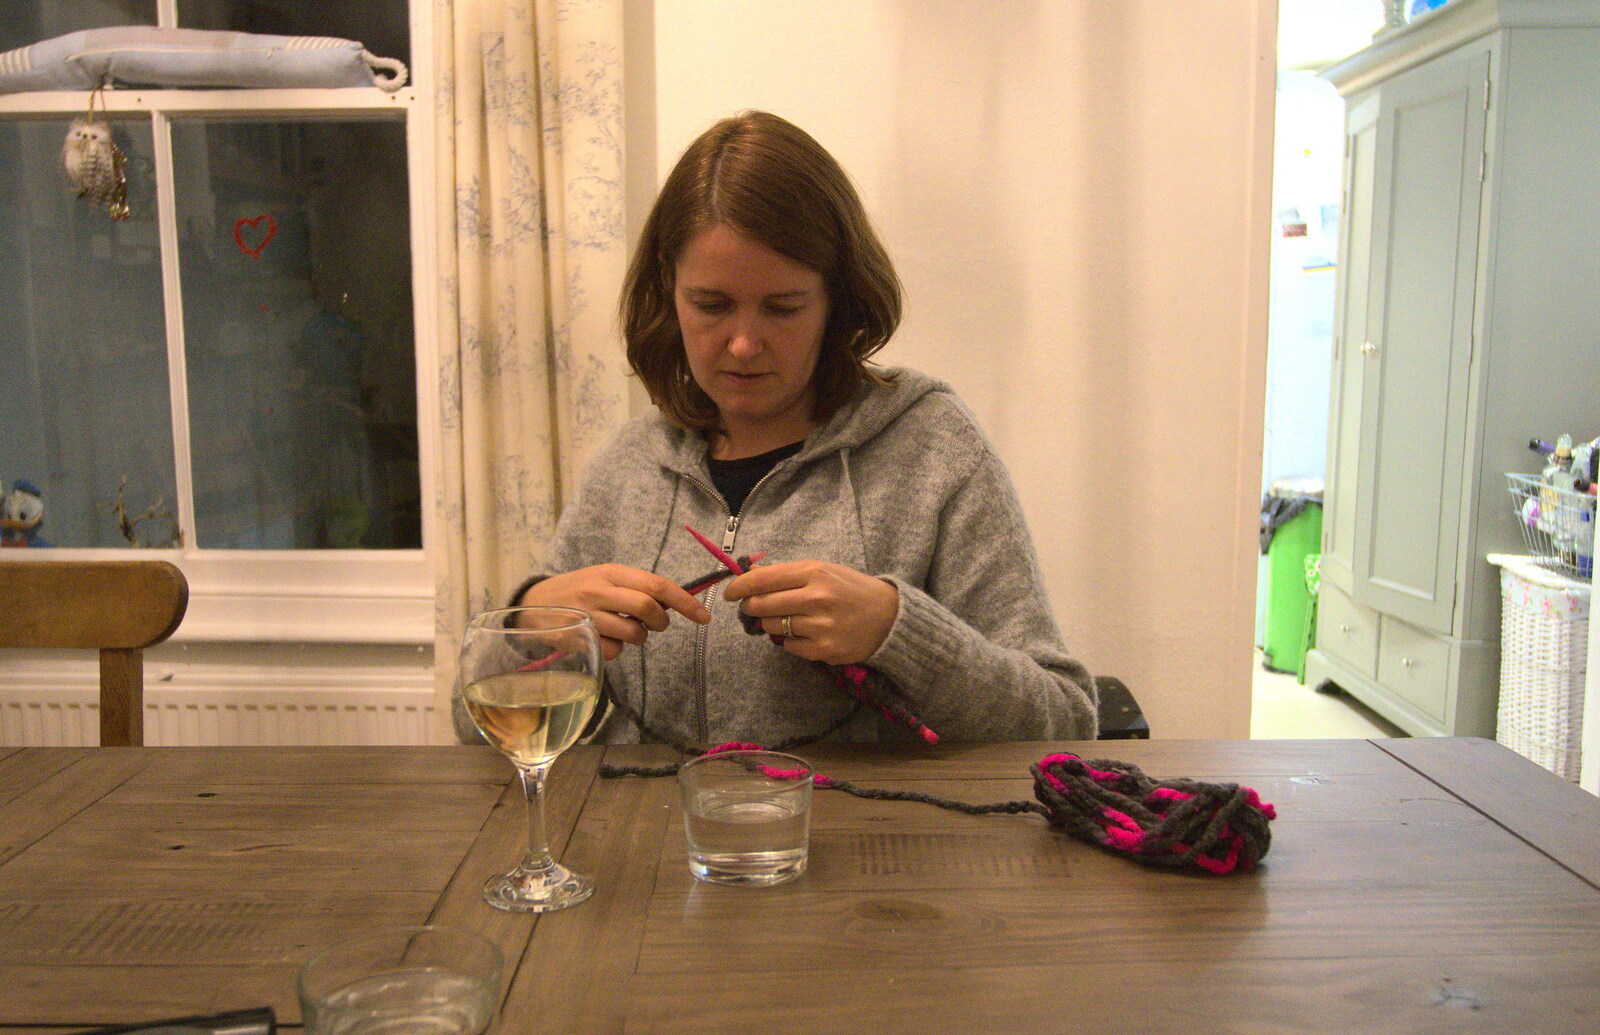 Isobel does some knitting from Fondue with the Swiss Massive, Gwydir Street, Cambridge - 19th November 2016